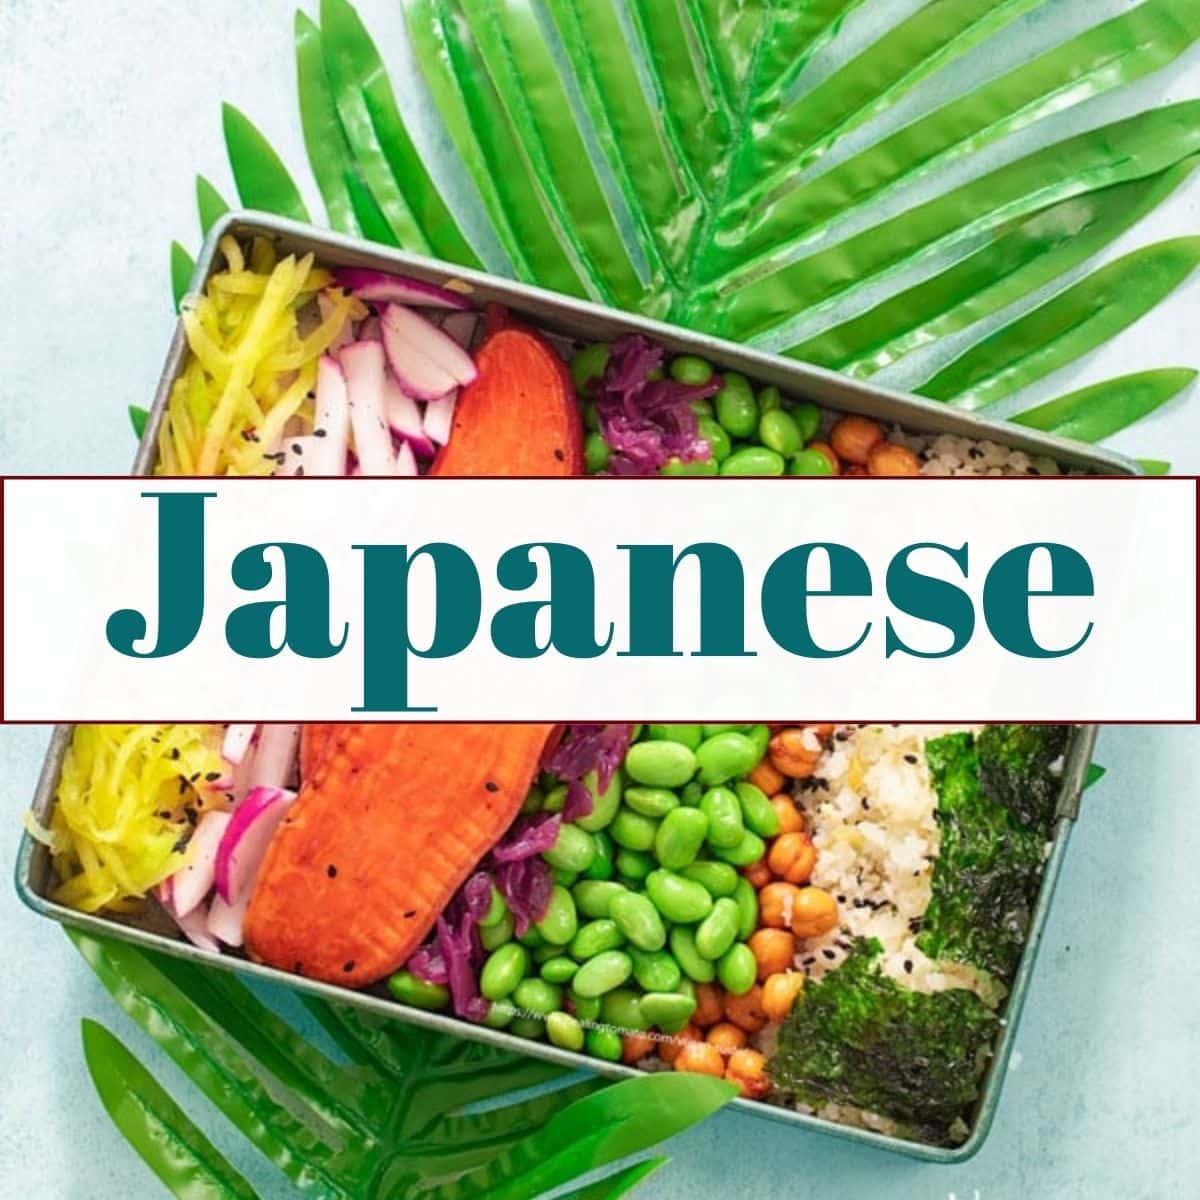 Easy Vegan Sushi Bowl as the backdrop and then, the title of the category is "Japanese"